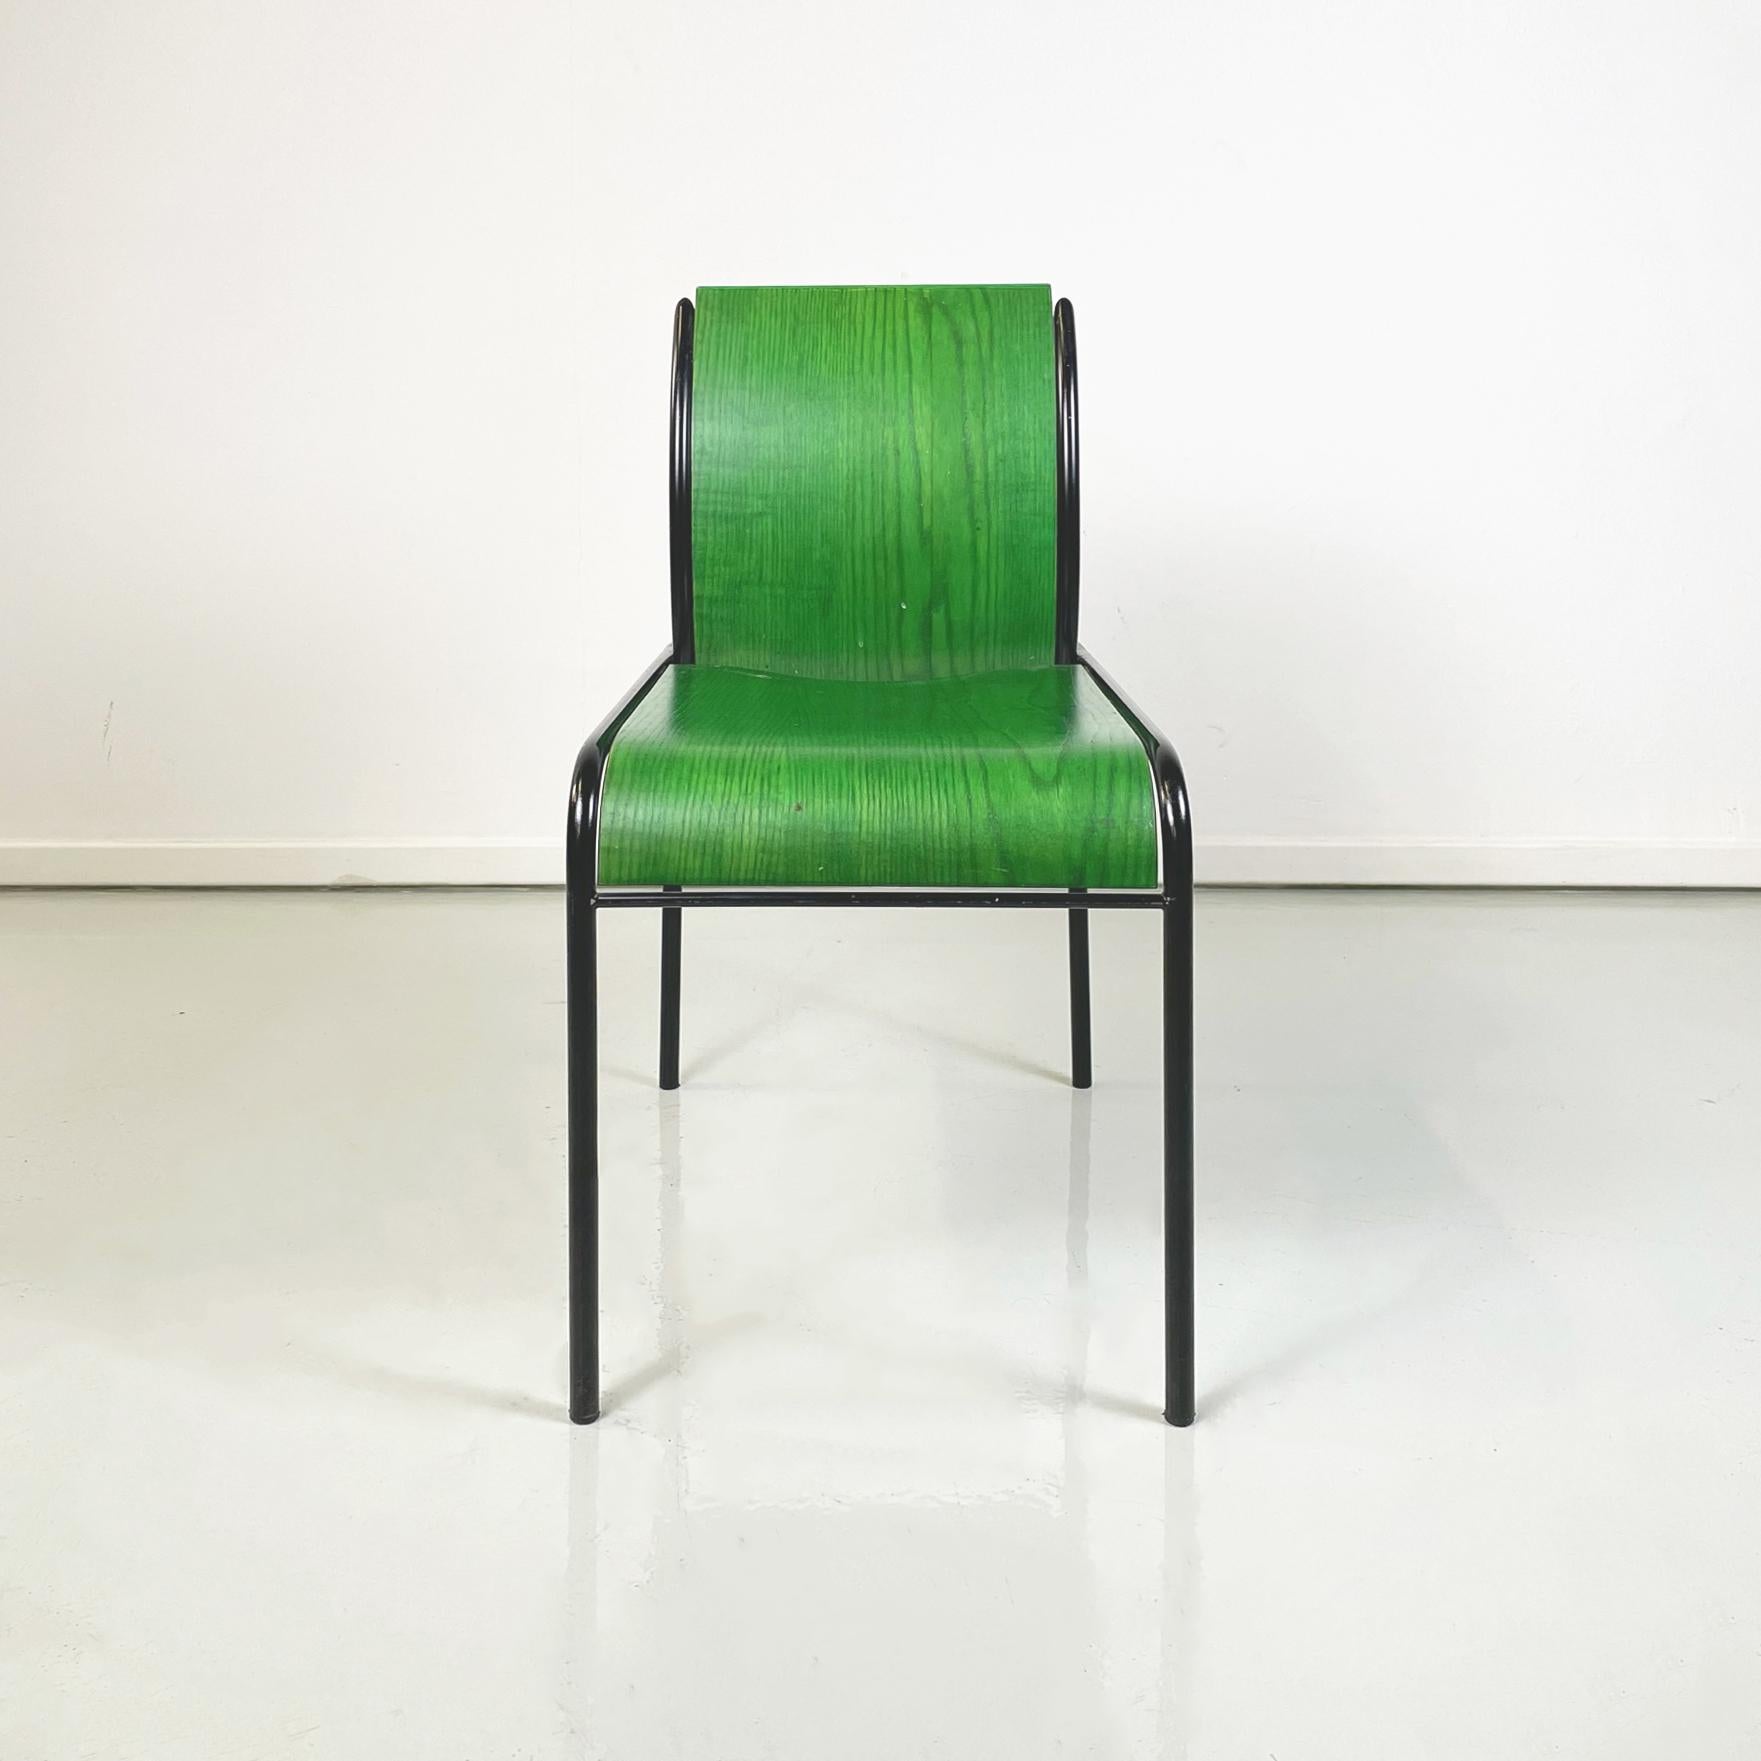 Italian modern Green wood and black metal Chair mod. Kim by Michele De Lucchi for Memphis, 1980s
Fantastic chair mod. Kim with the seat and the back in bright green painted wood. The rectangular seat is rounded on the front. The backrest is curved.